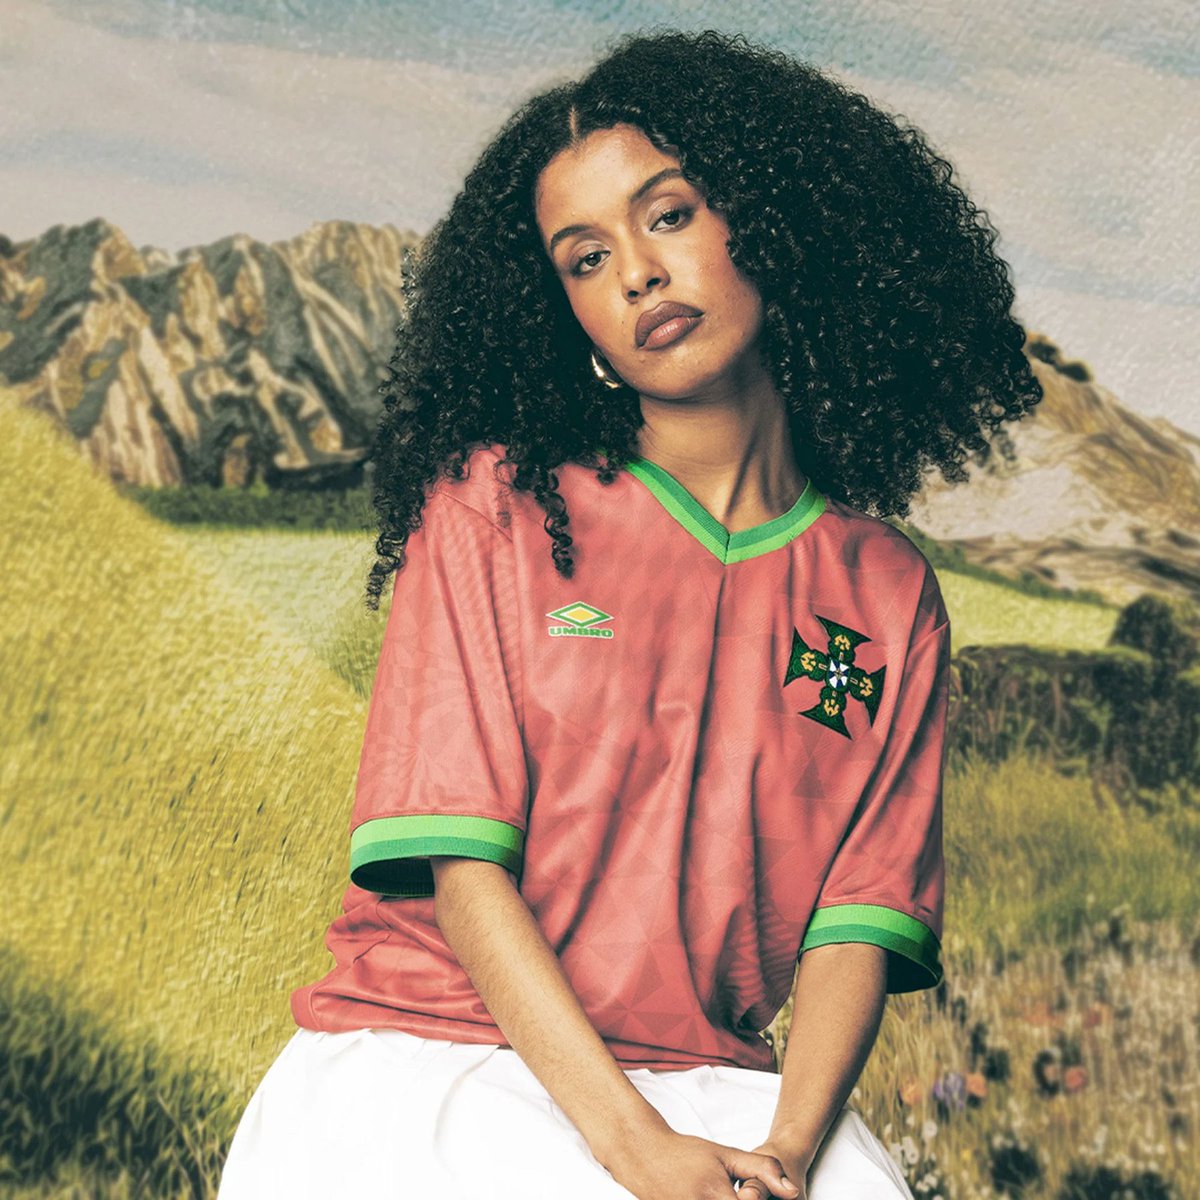 The Portugal Iconic Graphic Jersey from Umbro's 'United by Umbro' collection celebrates the unifying spirit of football.

Read more: footballshirtculture.com/lifestyle/port…

#portugal #umbro #footballshirts #soccerjersey #newkits